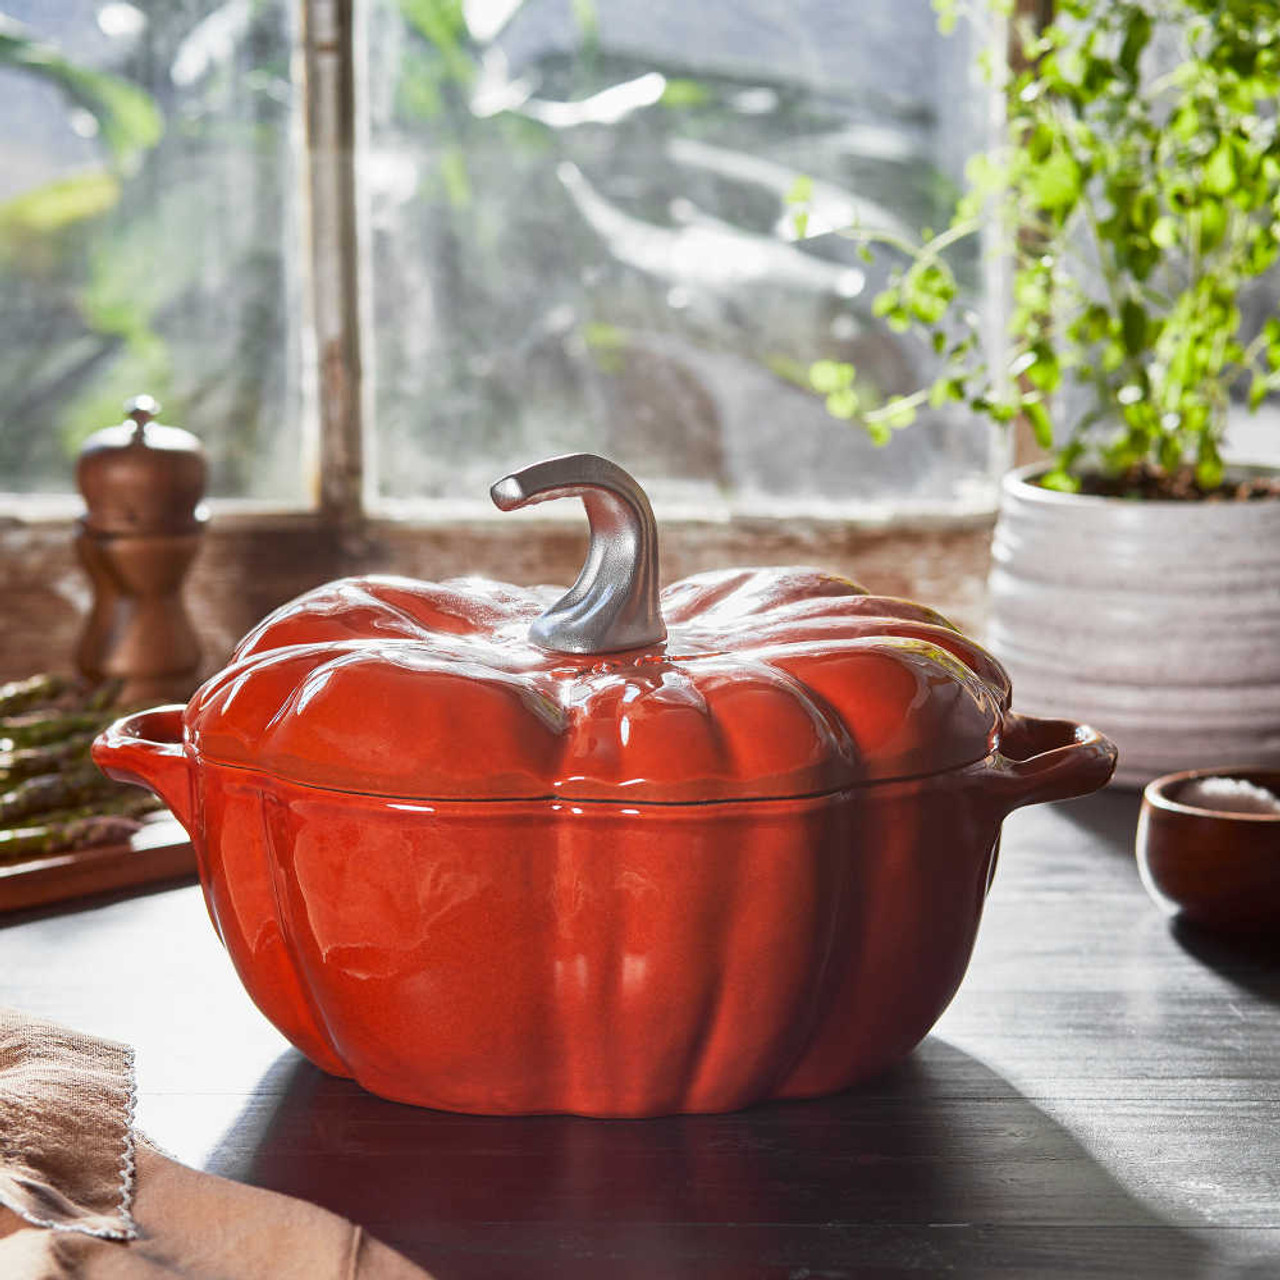 https://cdn11.bigcommerce.com/s-hccytny0od/images/stencil/1280x1280/products/5766/26625/Staub_Cast_Iron_Pumpkin_Cocotte_in_Burnt_Orange_1__97717.1702578993.jpg?c=2?imbypass=on